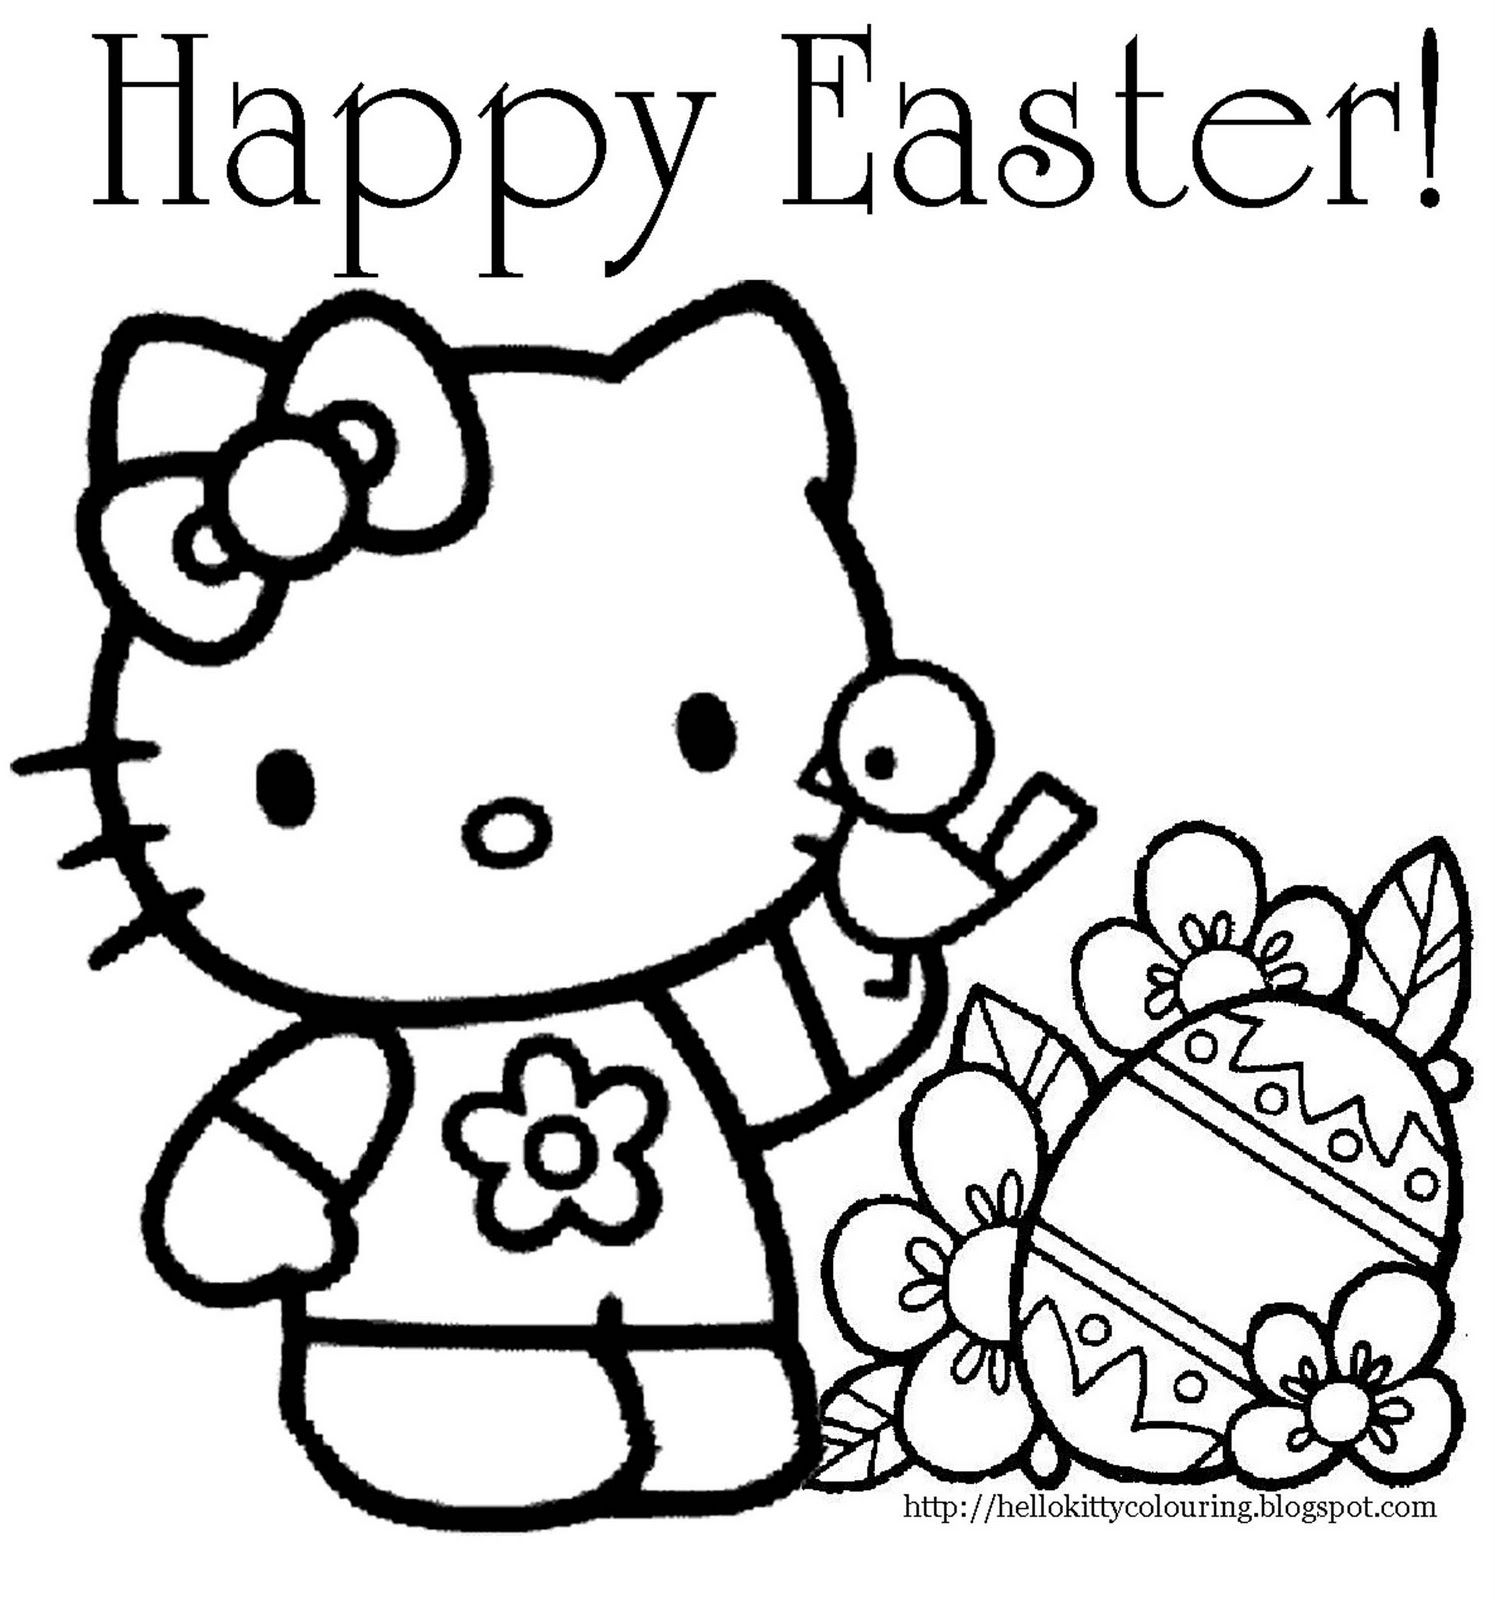 hello-kitty-happy-easter-coloring-page-2 - Free games for kidsFree ...